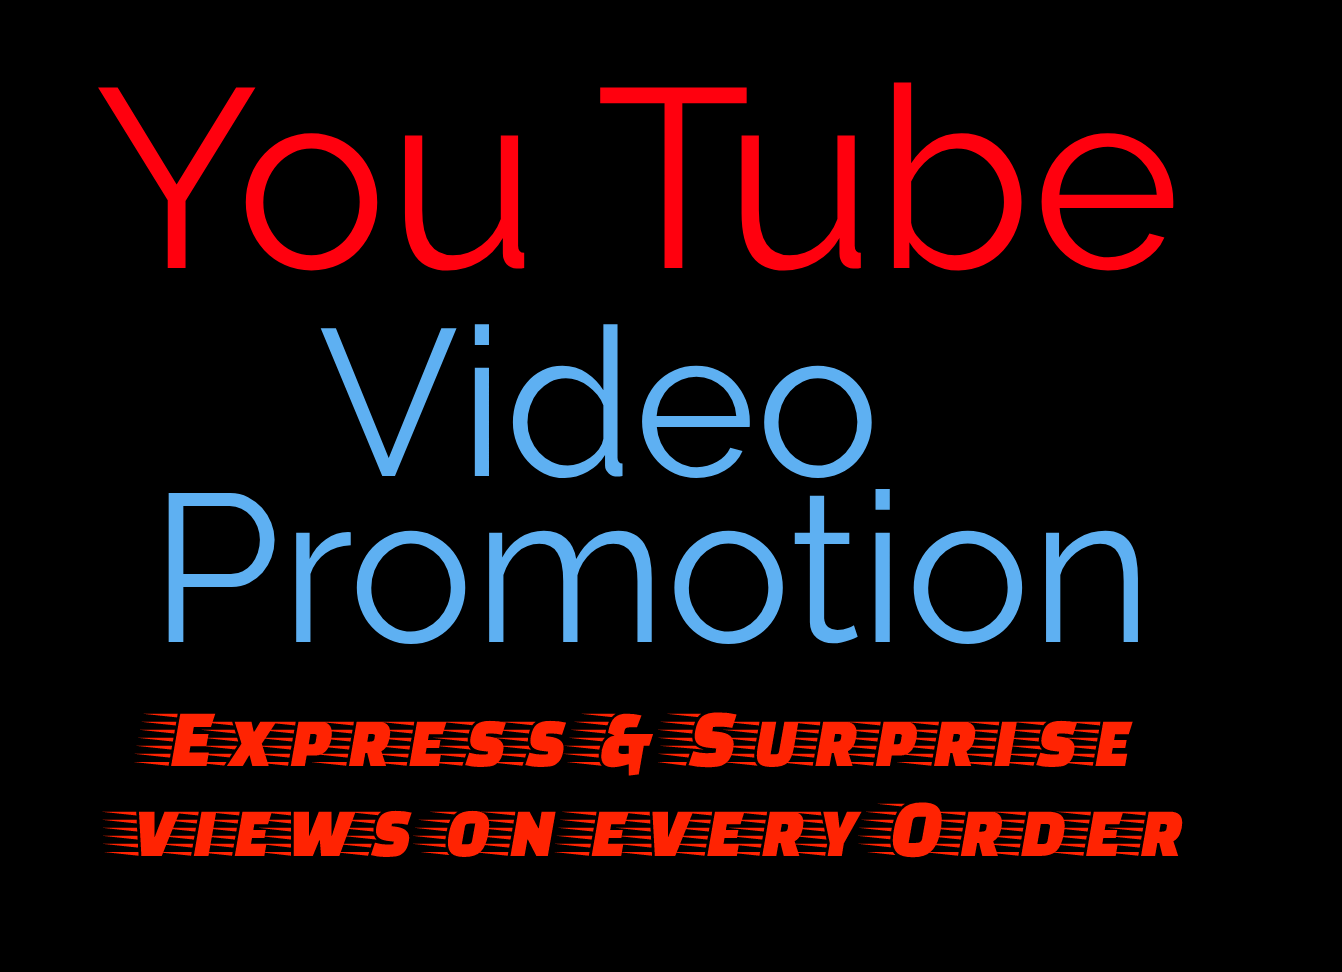 FAST AND HigH QUALITY VIDEO PROMOTION 